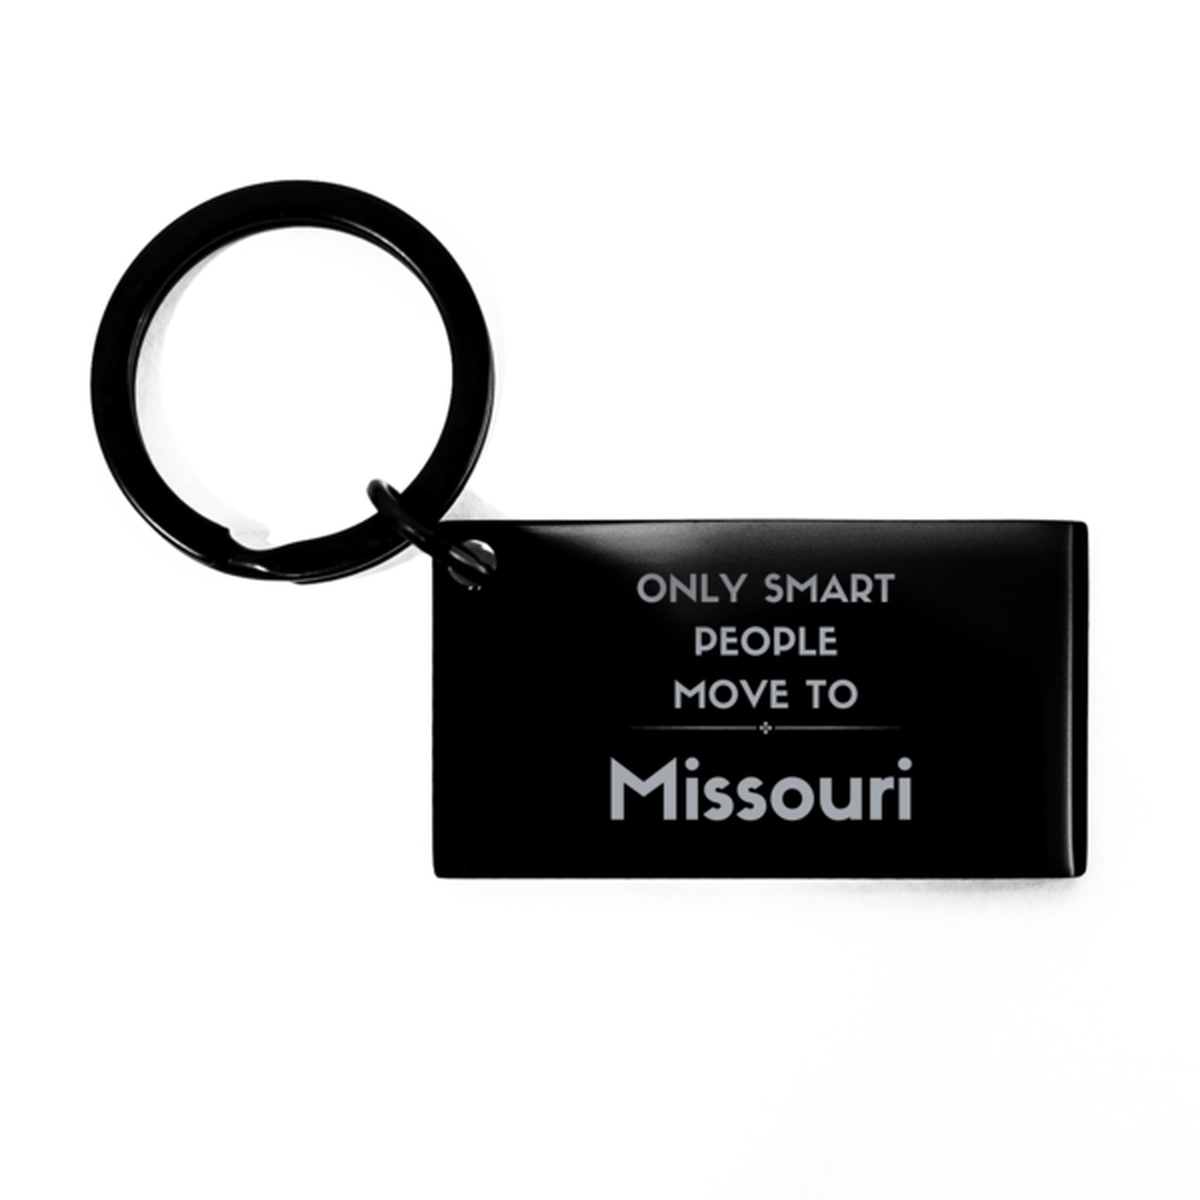 Only smart people move to Missouri Keychain, Gag Gifts For Missouri, Move to Missouri Gifts for Friends Coworker Funny Saying Quote